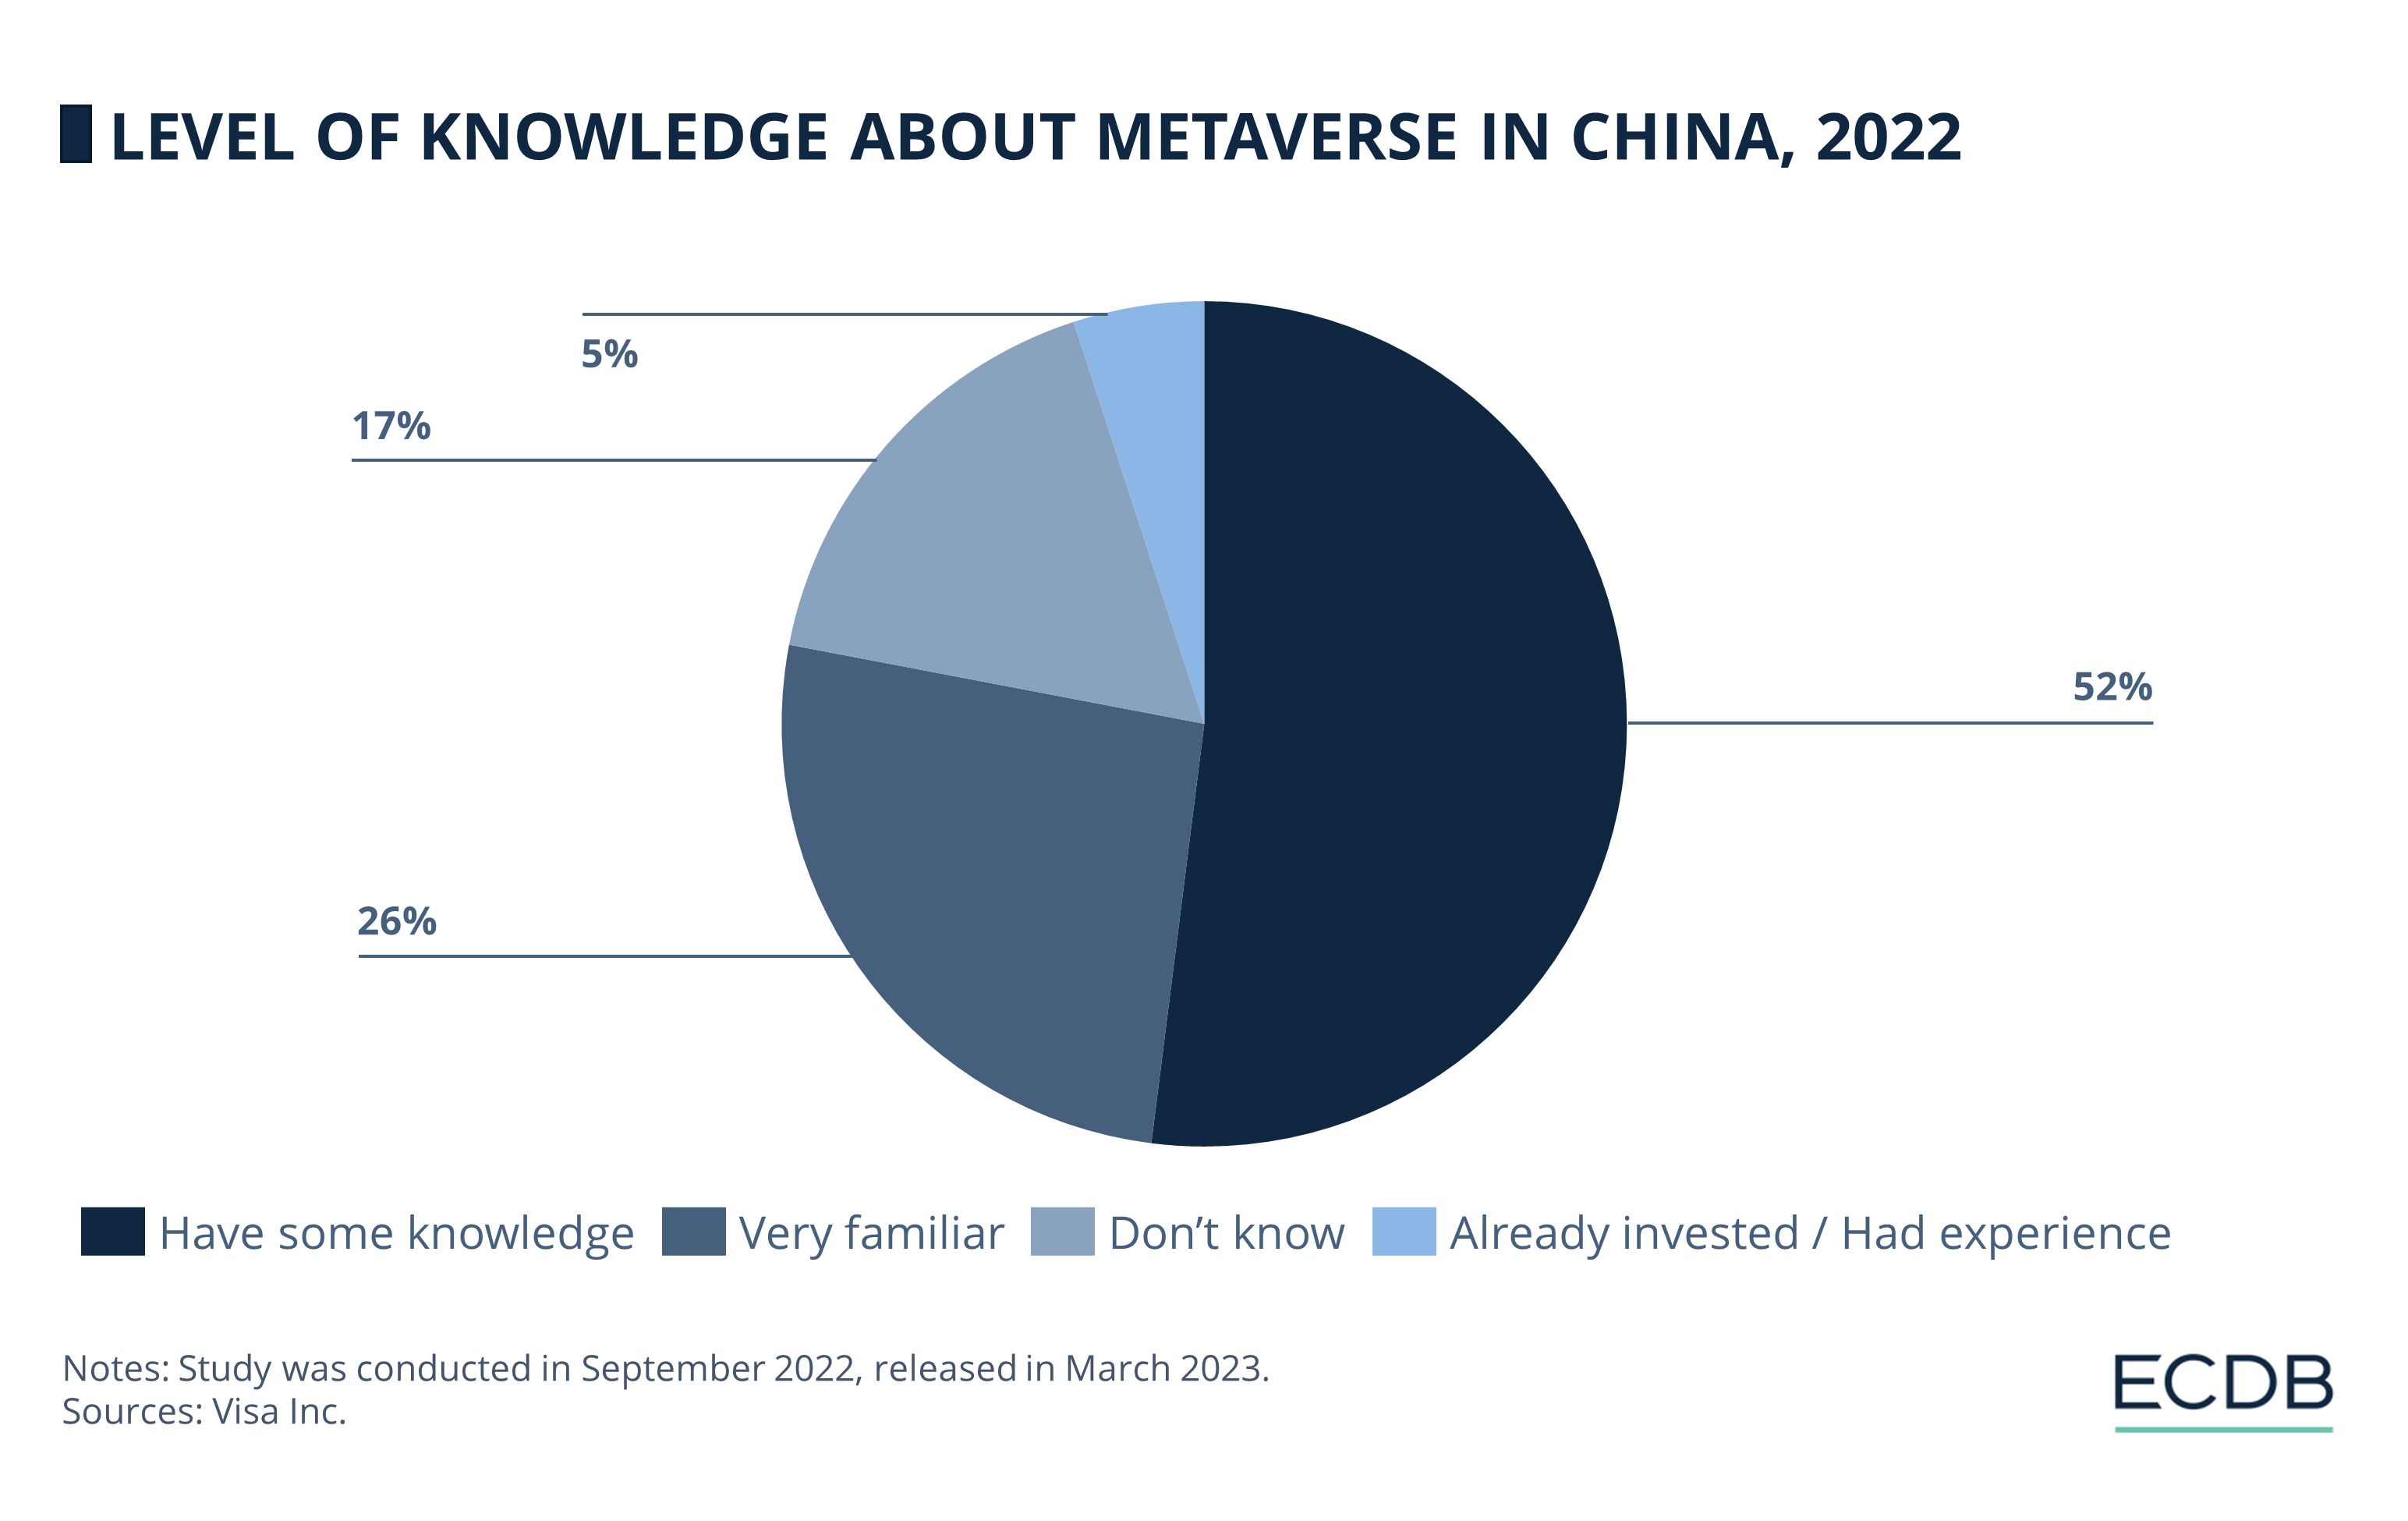 Level of Knowledge About Metaverse in China, 2022